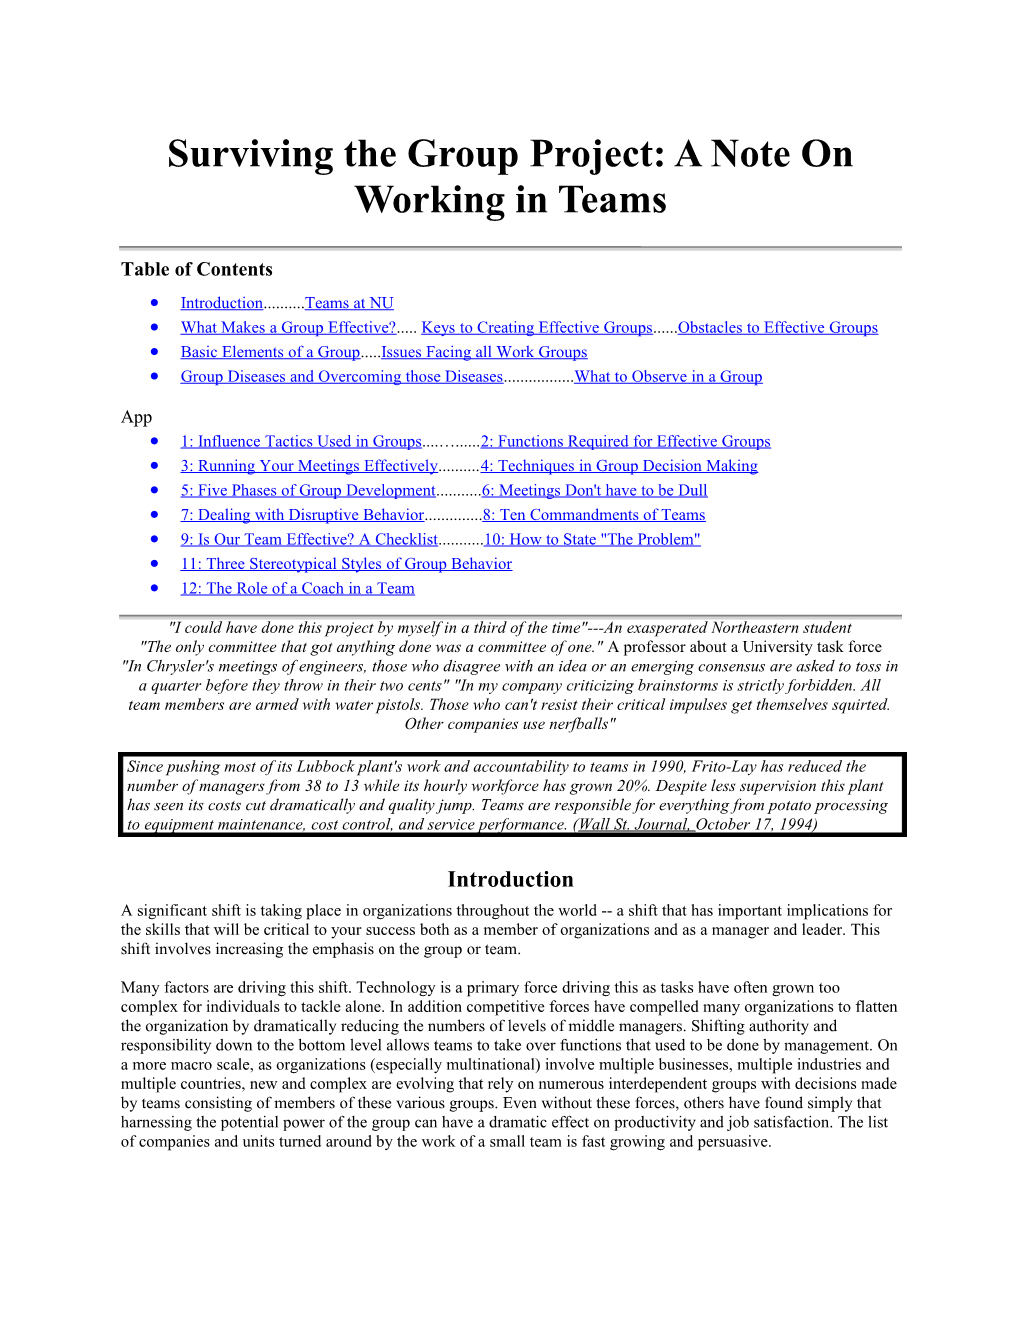 Surviving the Group Project: a Note on Working in Teams